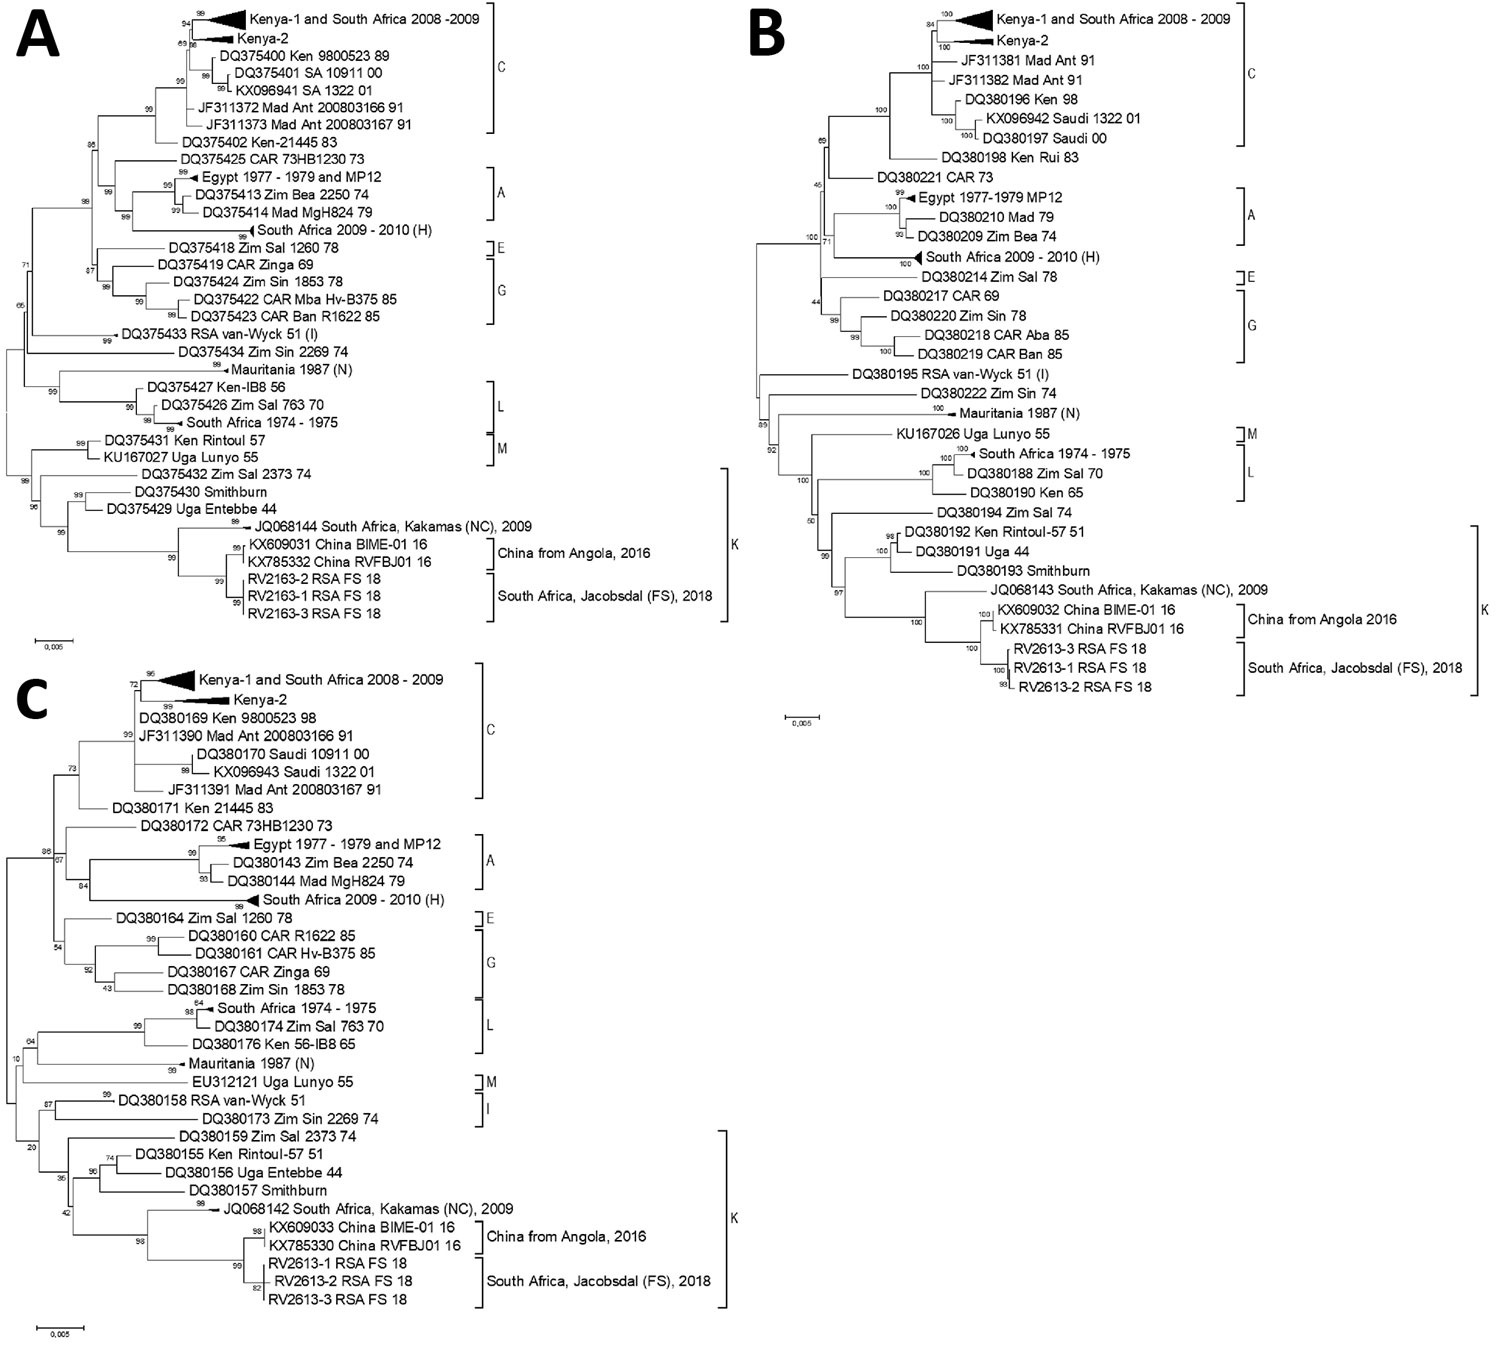 Phylogenetic comparison of the complete segments of Rift Valley fever viruses from South Africa, 2018, and reference isolates. A) Large segment; B) medium segment; C) small segment. Distinct clusters separate the isolates into 10 lineages (A, C, E, G, H, I, K, L, N, and M). Sequences RV2613/RSA/2018 are marked as South Africa, Jacobsdal (FS), 2018 in cluster K. GenBank accession numbers are provided. FS, Free State.